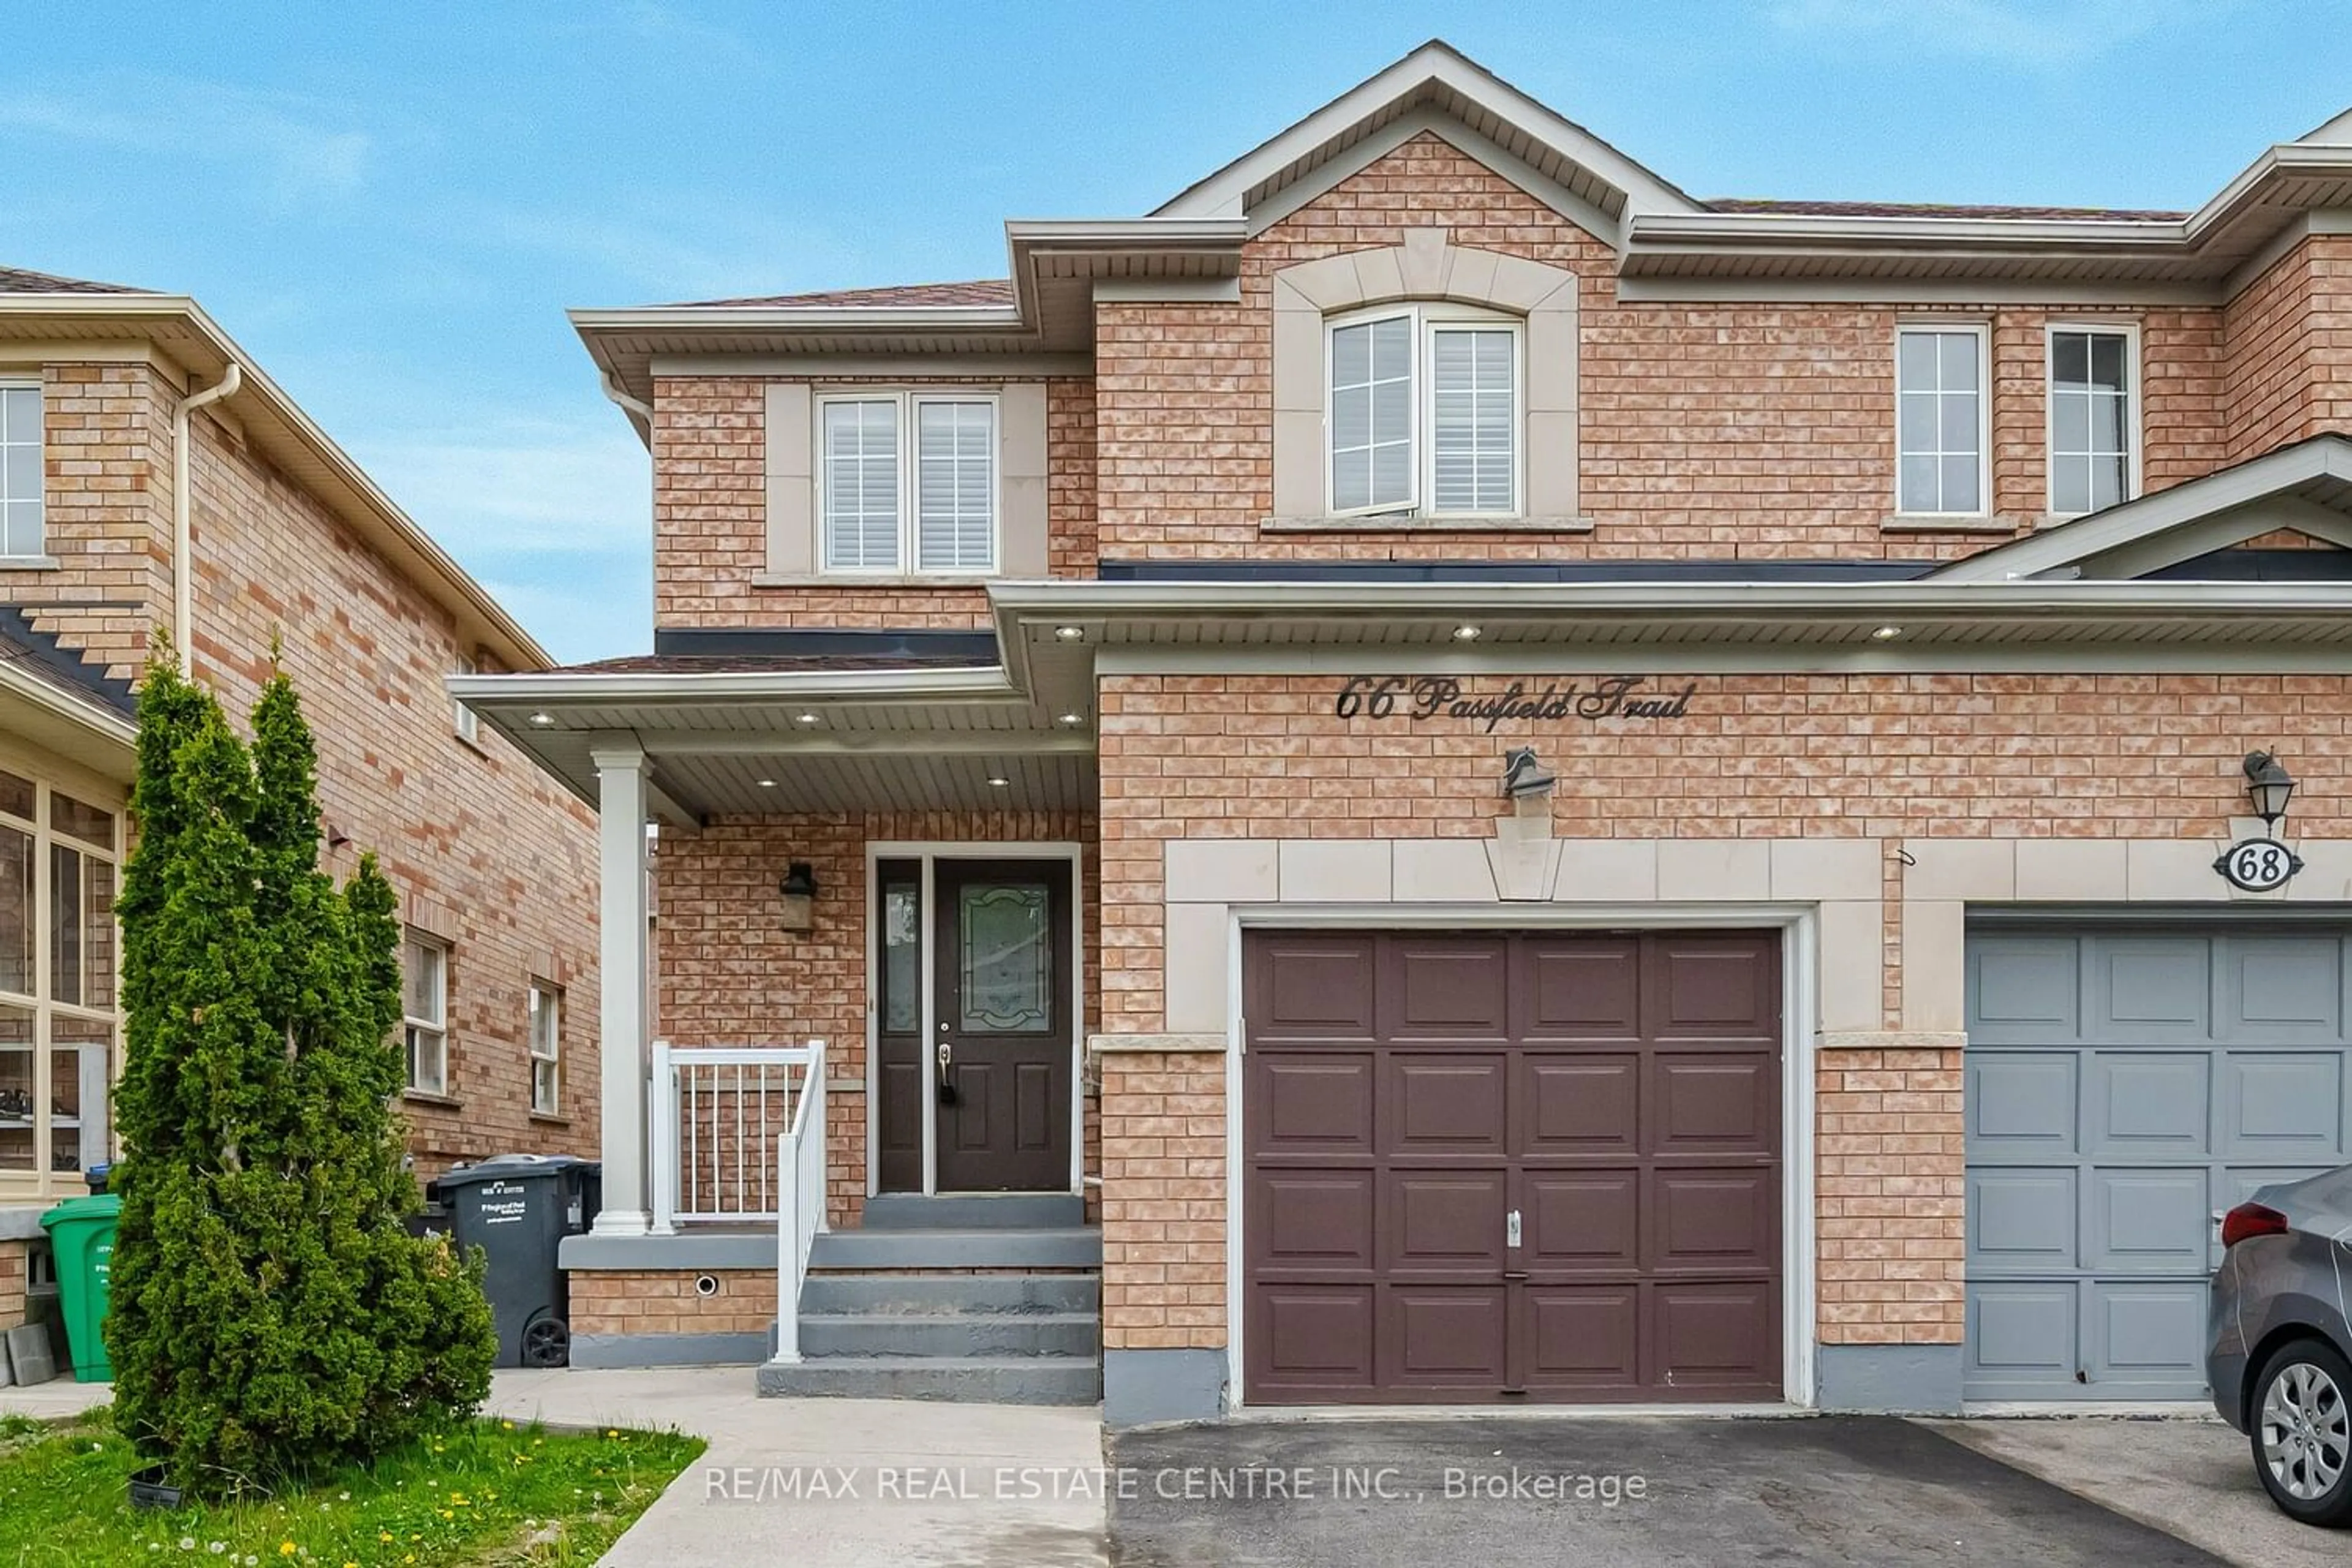 Home with brick exterior material for 66 Passfield Tr, Brampton Ontario L6P 1T9